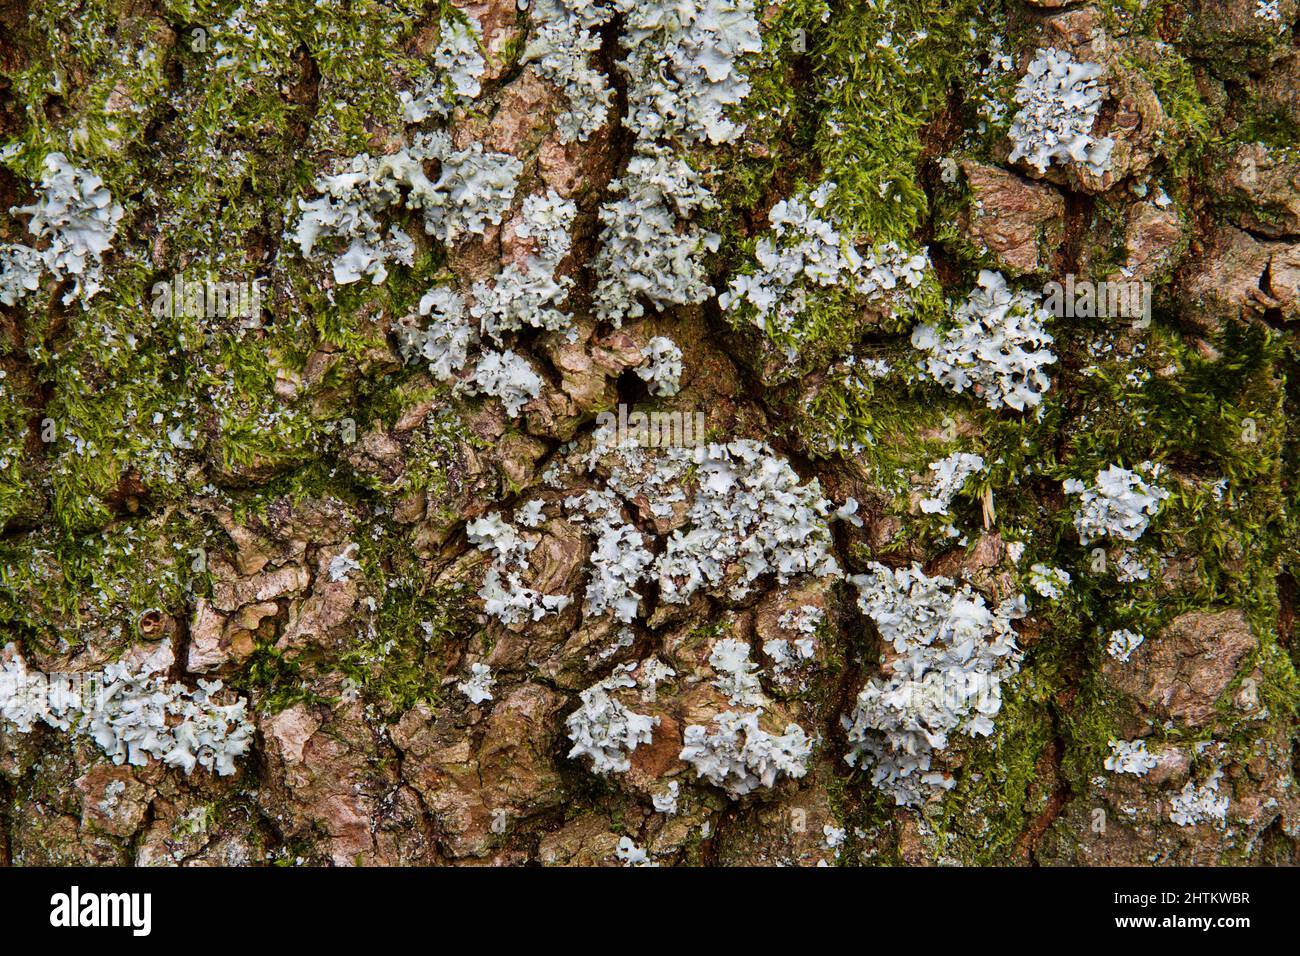 Hammered shield lichen and moss on the bark of an Oak tree Stock Photo